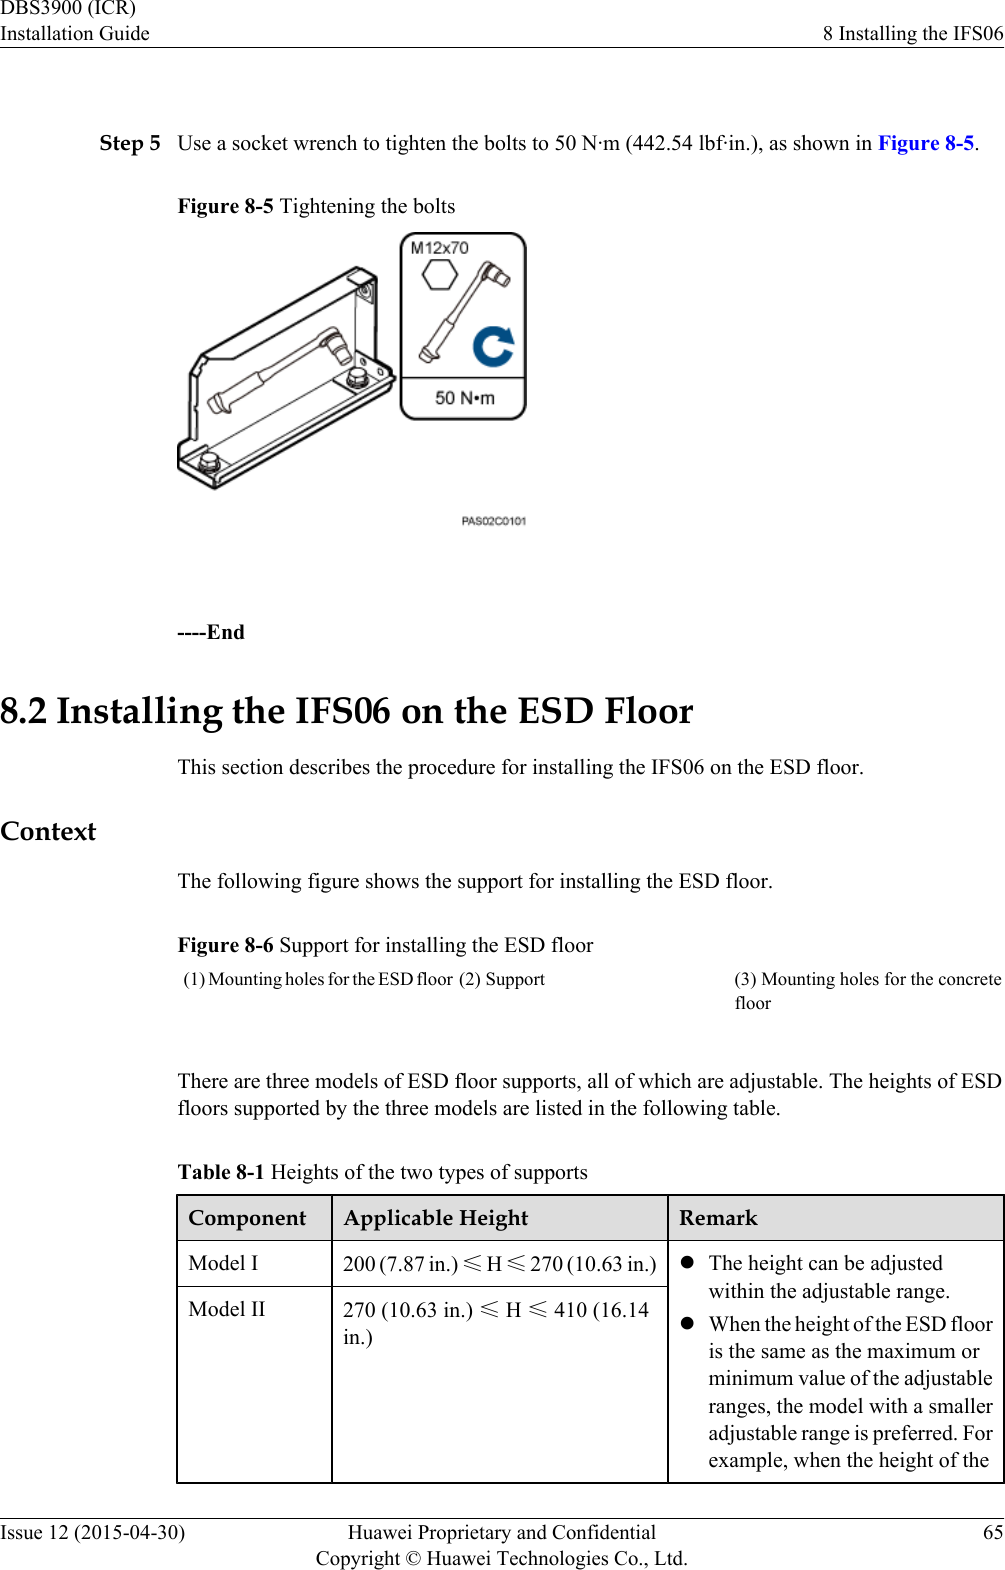  Step 5 Use a socket wrench to tighten the bolts to 50 N·m (442.54 lbf·in.), as shown in Figure 8-5.Figure 8-5 Tightening the bolts ----End8.2 Installing the IFS06 on the ESD FloorThis section describes the procedure for installing the IFS06 on the ESD floor.ContextThe following figure shows the support for installing the ESD floor.Figure 8-6 Support for installing the ESD floor(1) Mounting holes for the ESD floor (2) Support (3) Mounting holes for the concretefloorThere are three models of ESD floor supports, all of which are adjustable. The heights of ESDfloors supported by the three models are listed in the following table.Table 8-1 Heights of the two types of supportsComponent Applicable Height RemarkModel I 200 (7.87 in.) ≤ H ≤ 270 (10.63 in.) lThe height can be adjustedwithin the adjustable range.lWhen the height of the ESD flooris the same as the maximum orminimum value of the adjustableranges, the model with a smalleradjustable range is preferred. Forexample, when the height of theModel II 270 (10.63 in.) ≤ H ≤ 410 (16.14in.)DBS3900 (ICR)Installation Guide 8 Installing the IFS06Issue 12 (2015-04-30) Huawei Proprietary and ConfidentialCopyright © Huawei Technologies Co., Ltd.65